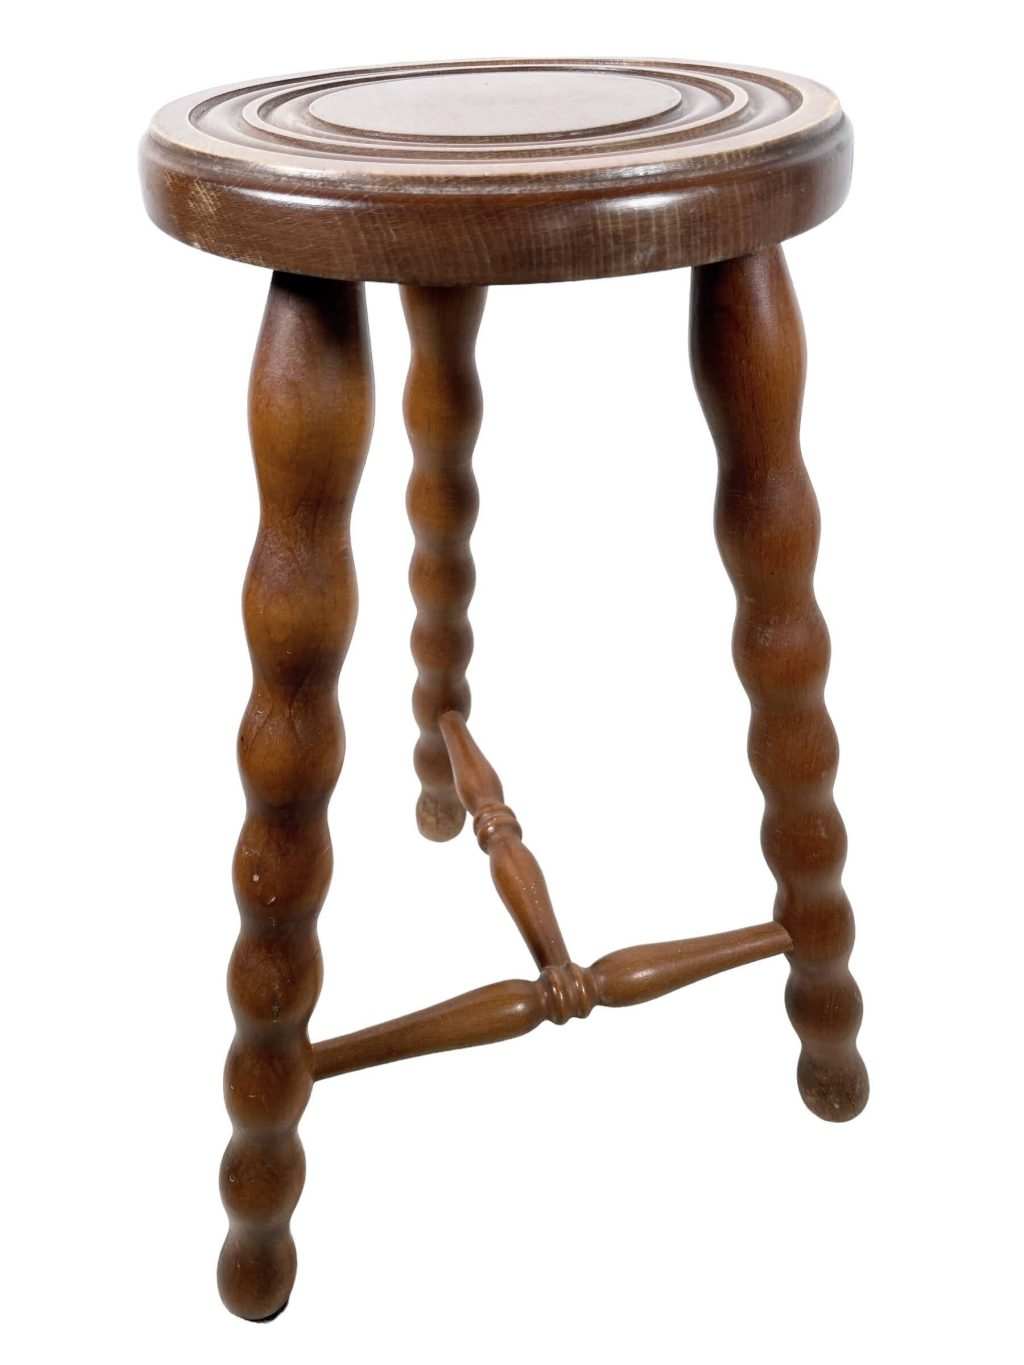 Vintage French Wooden Bobbin Leg Milking Stool Chair Seat Table Farm Circular Shaped Seat Plant Rest Stand Plinth Tabouret c1970-80’s